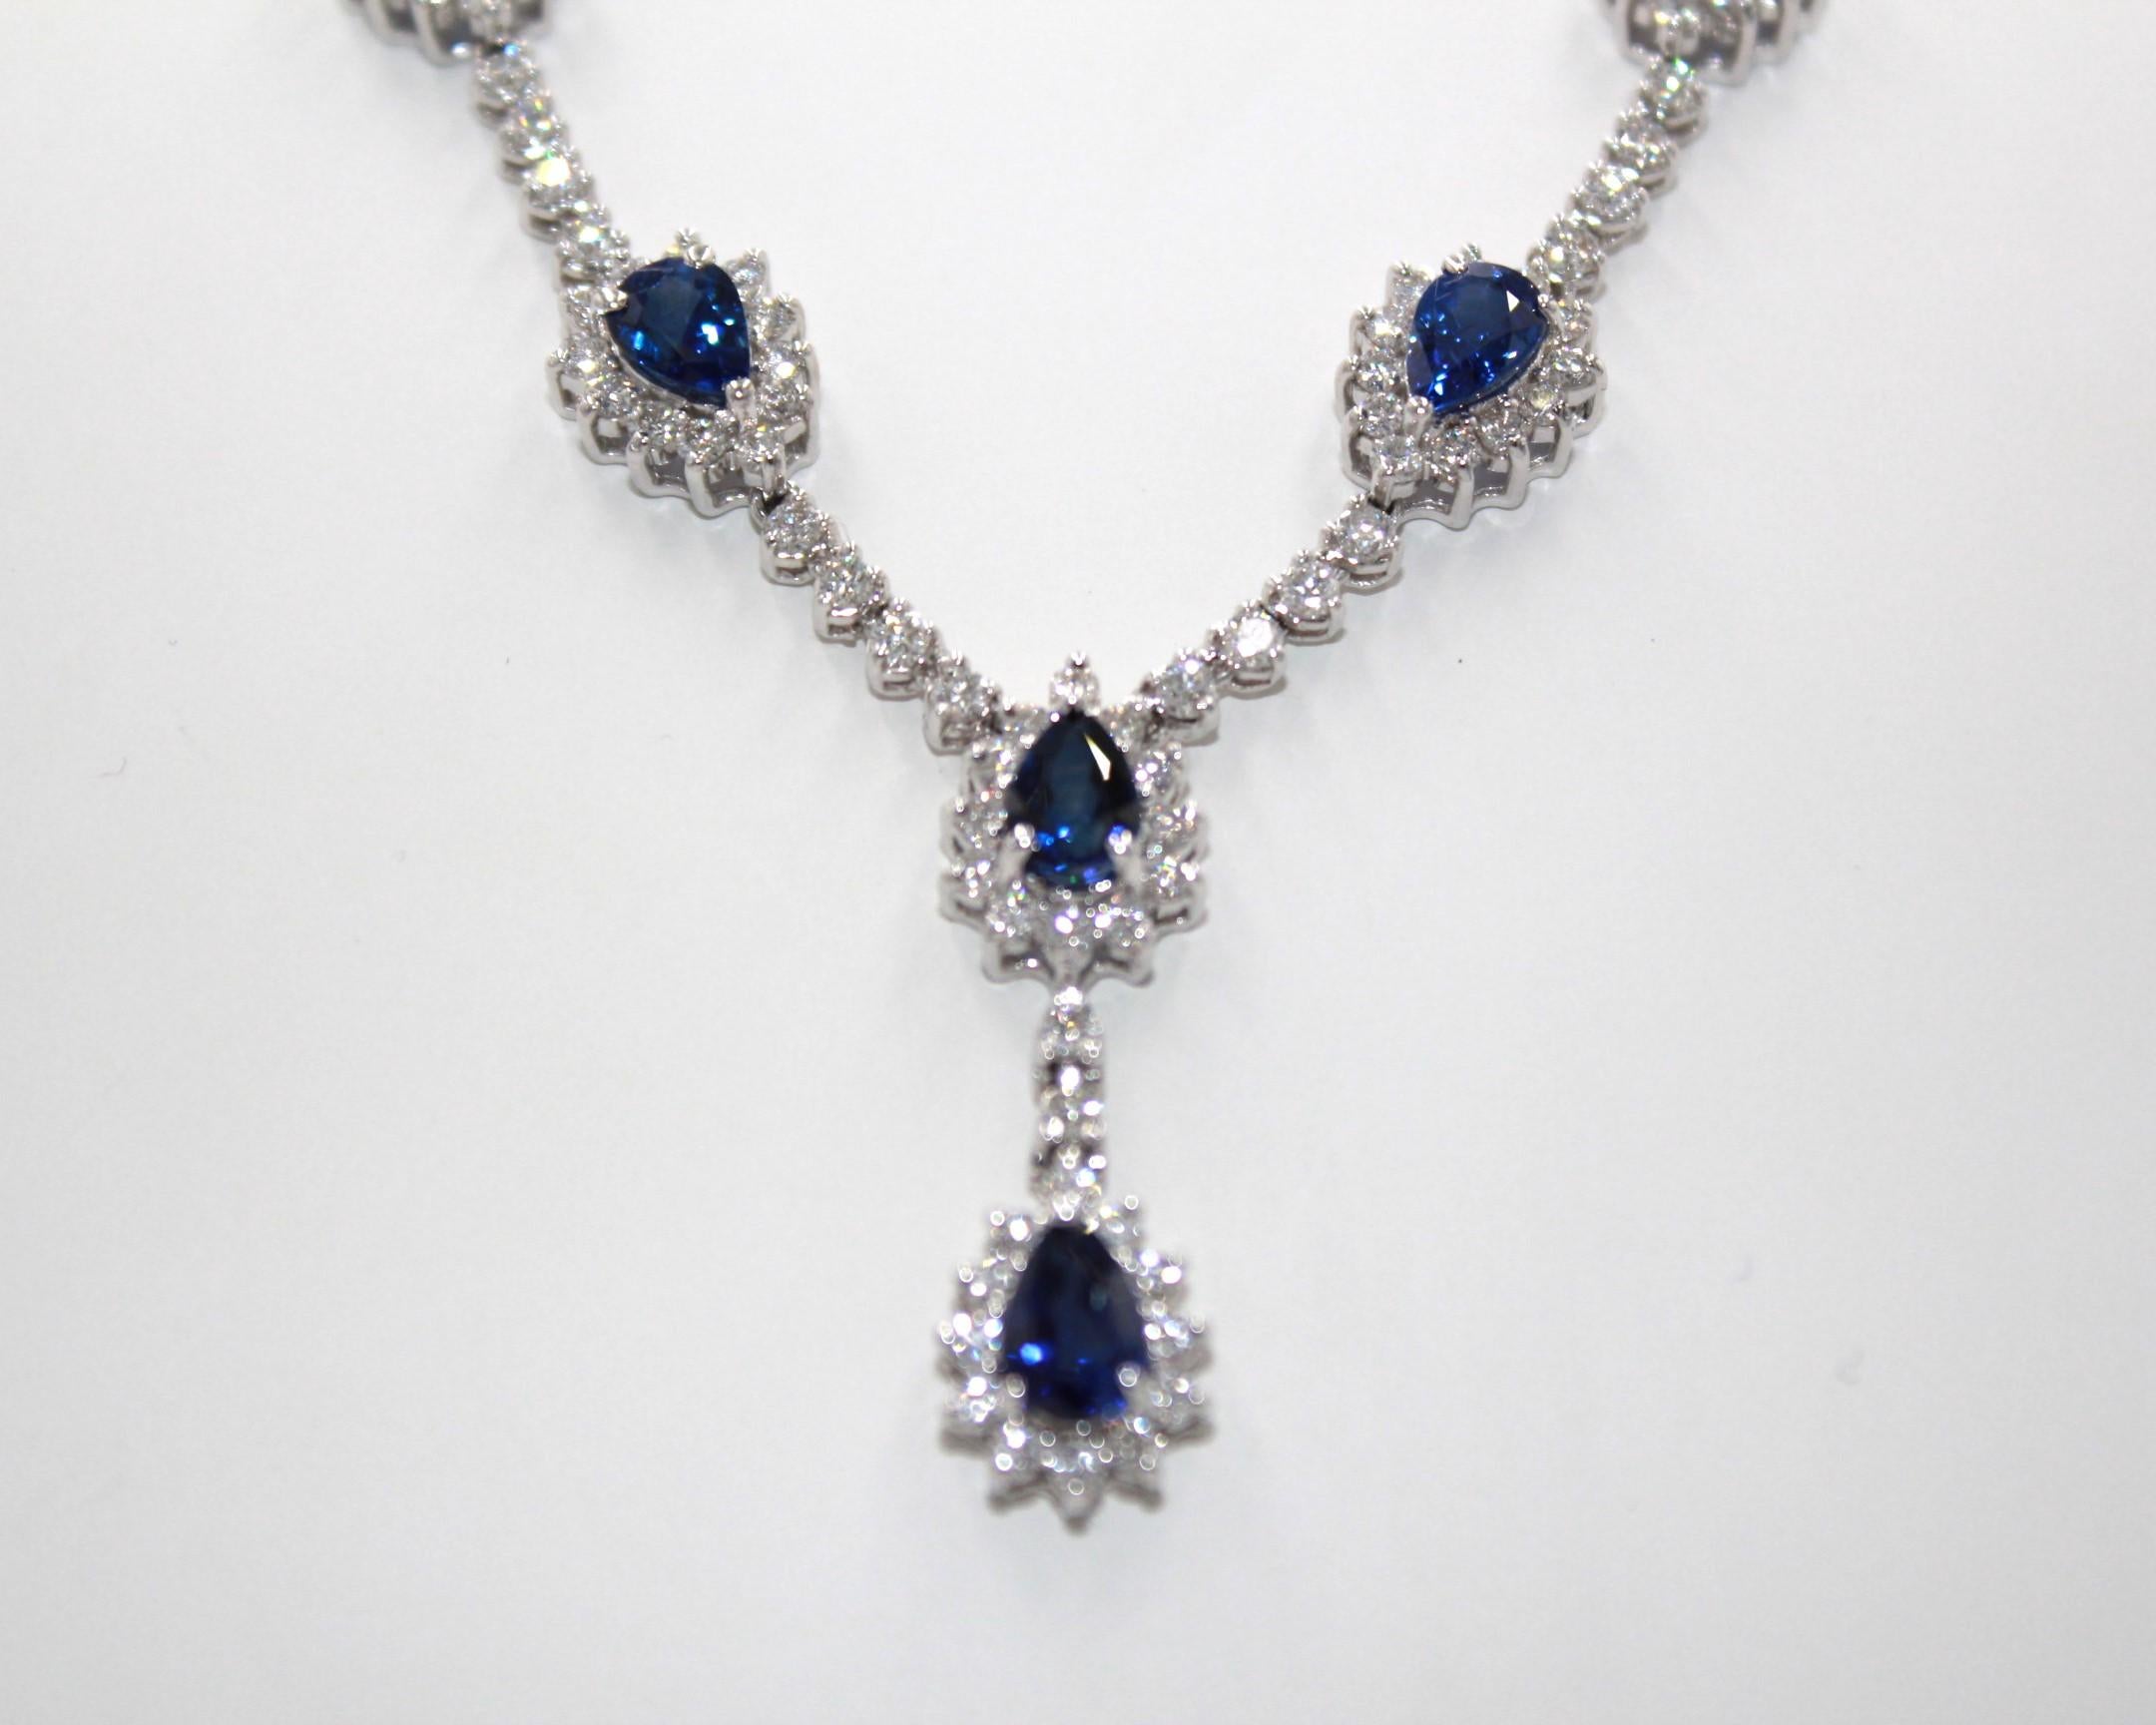 7.069 carats Pear shape Ceylon Sapphire with 208 round diamonds, totaling a diamond weight of 6.56 carats. 

This stunning Sapphire & Diamond Necklace will highlight your uniqueness and elegance. 

Item Details:
- Type: Necklace
- Metal: 18K Gold
-